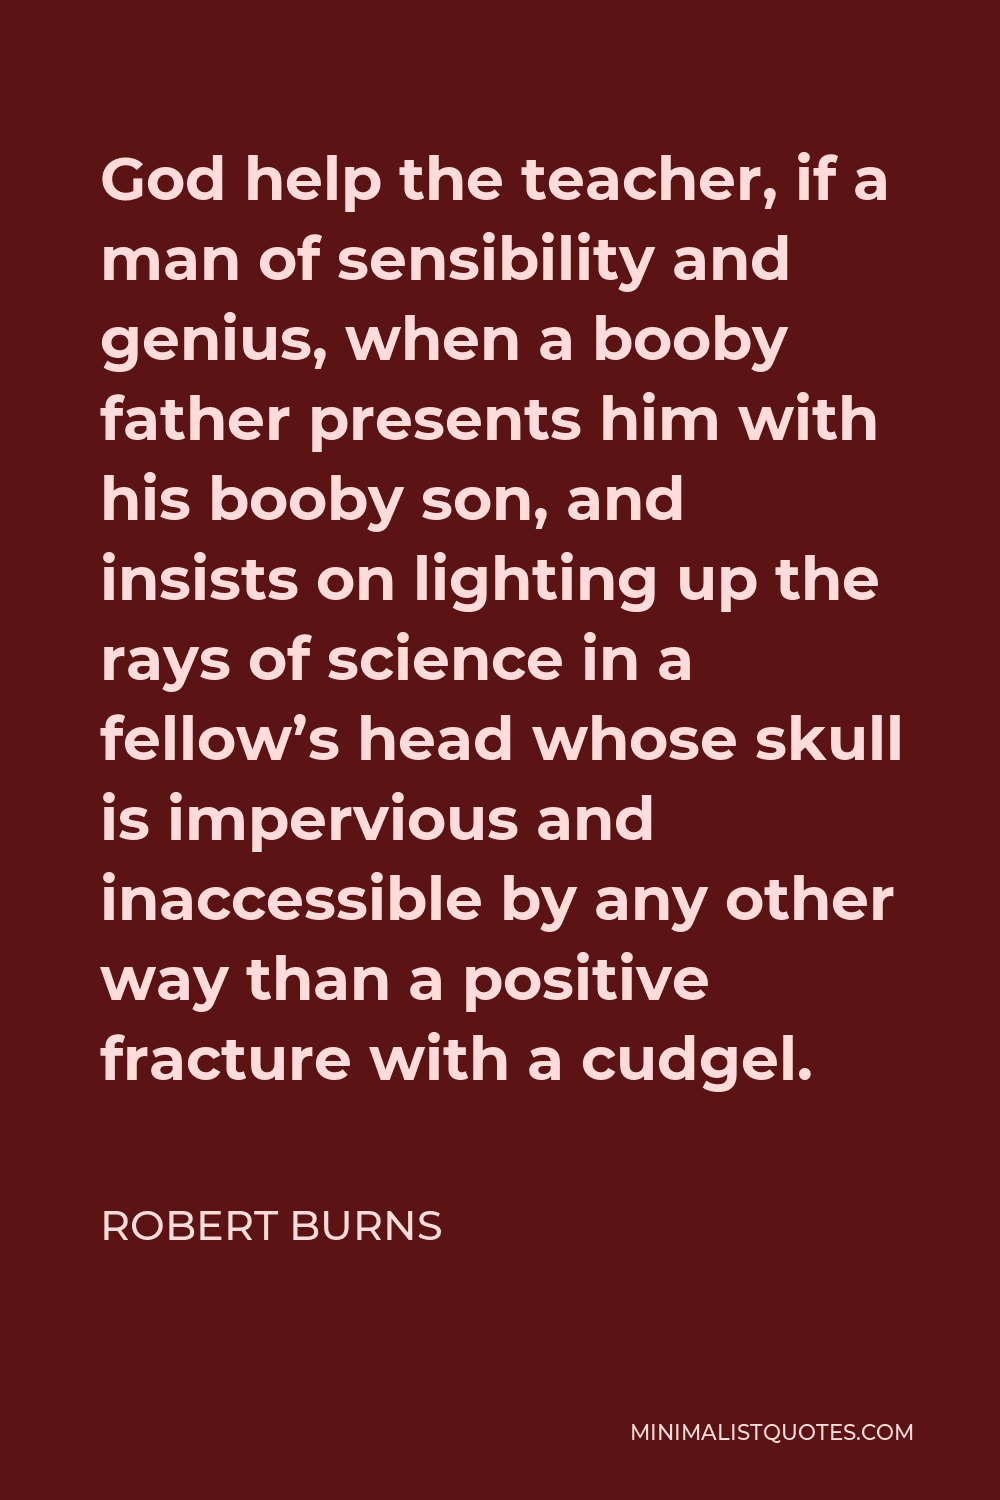 Robert Burns Quote - God help the teacher, if a man of sensibility and genius, when a booby father presents him with his booby son, and insists on lighting up the rays of science in a fellow’s head whose skull is impervious and inaccessible by any other way than a positive fracture with a cudgel.